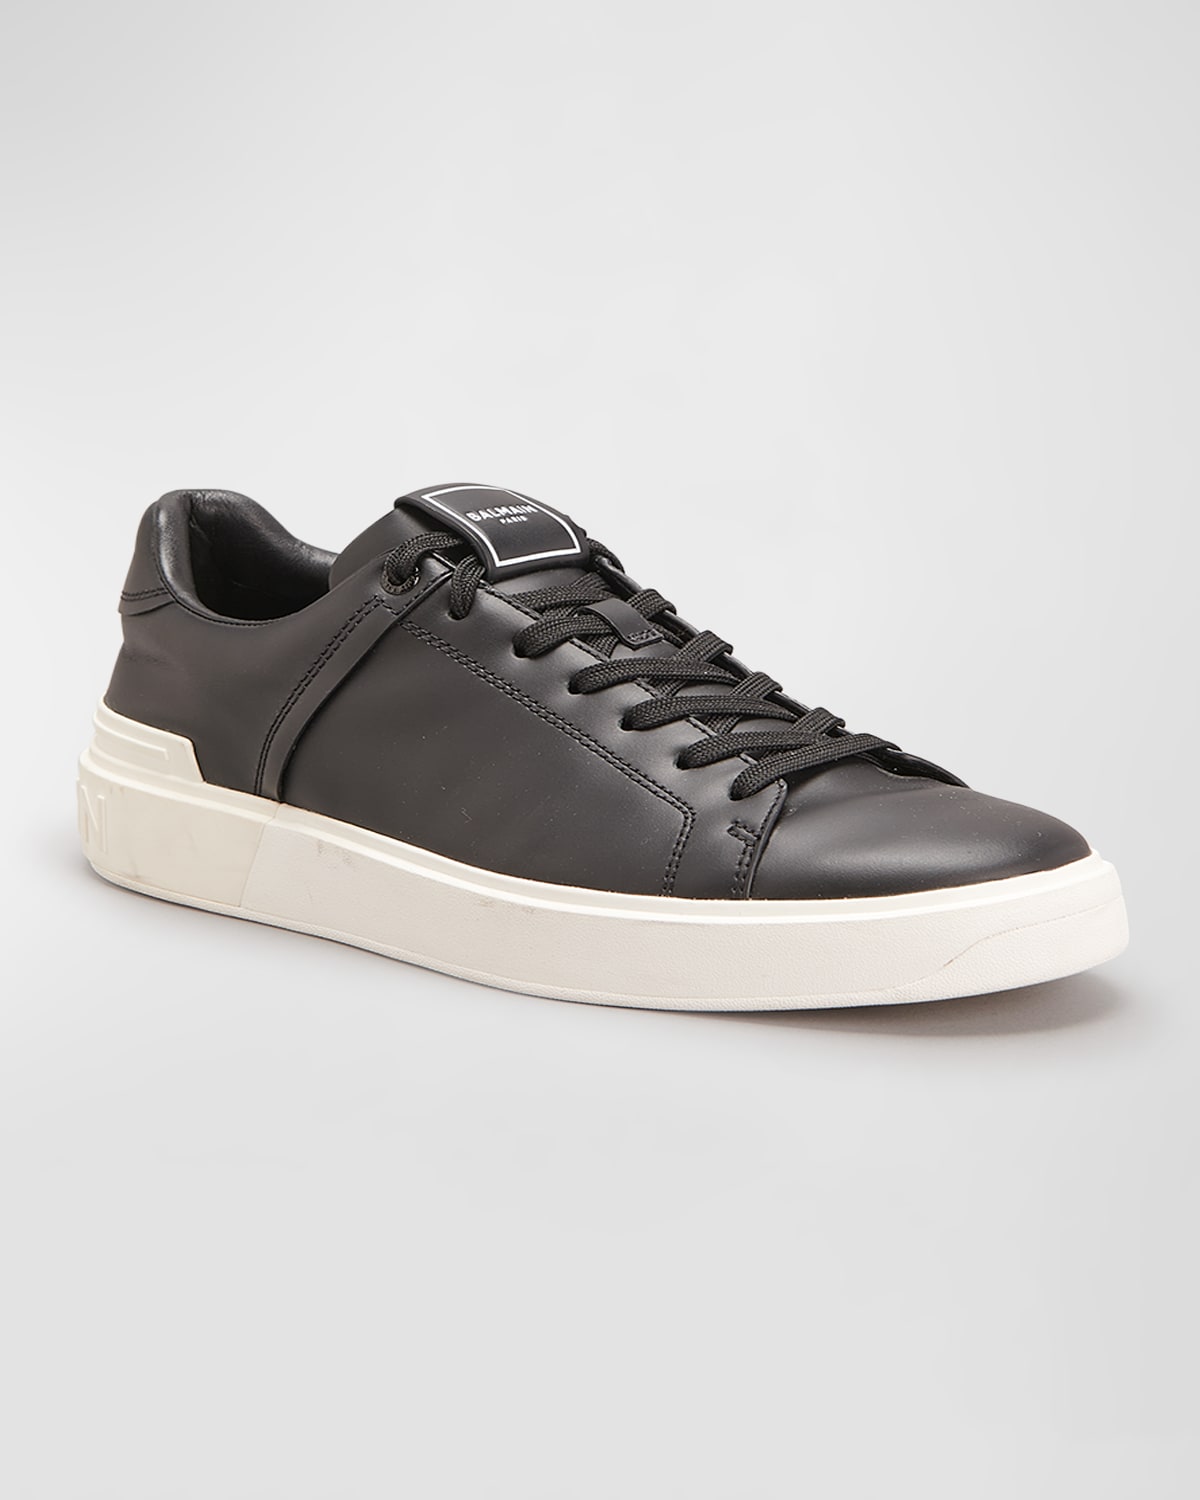 Balmain Men's B-court Leather Low-top Trainers In Black/white